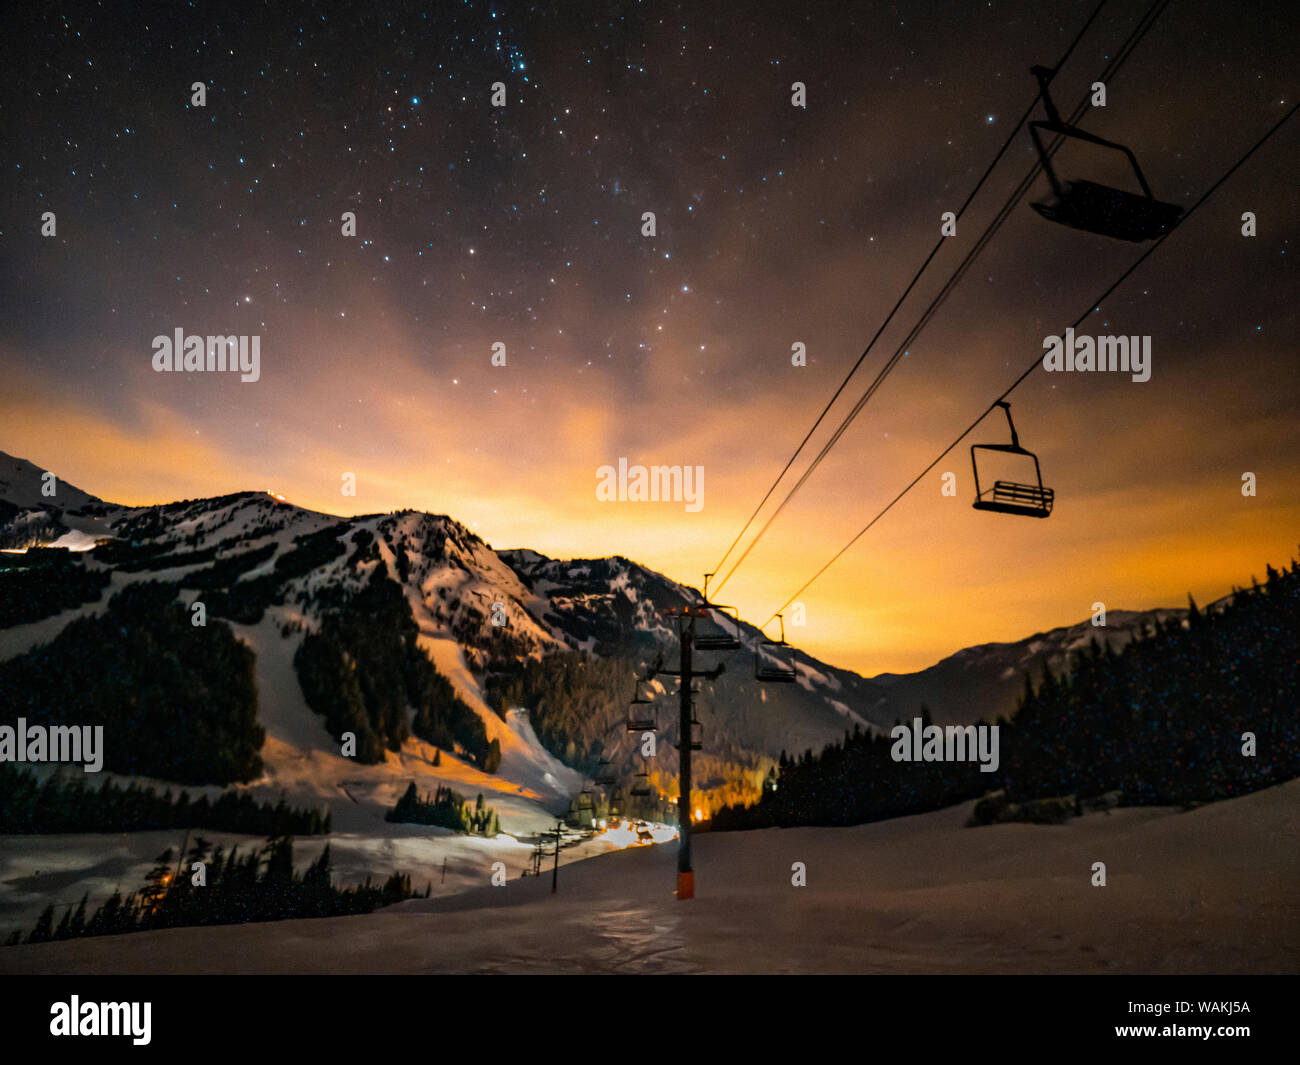 USA, Washington State, Pierce County, Crystal Mountain Resort. Chairlift in front of starry dusk sky as sun sets behind mountains. Stock Photo